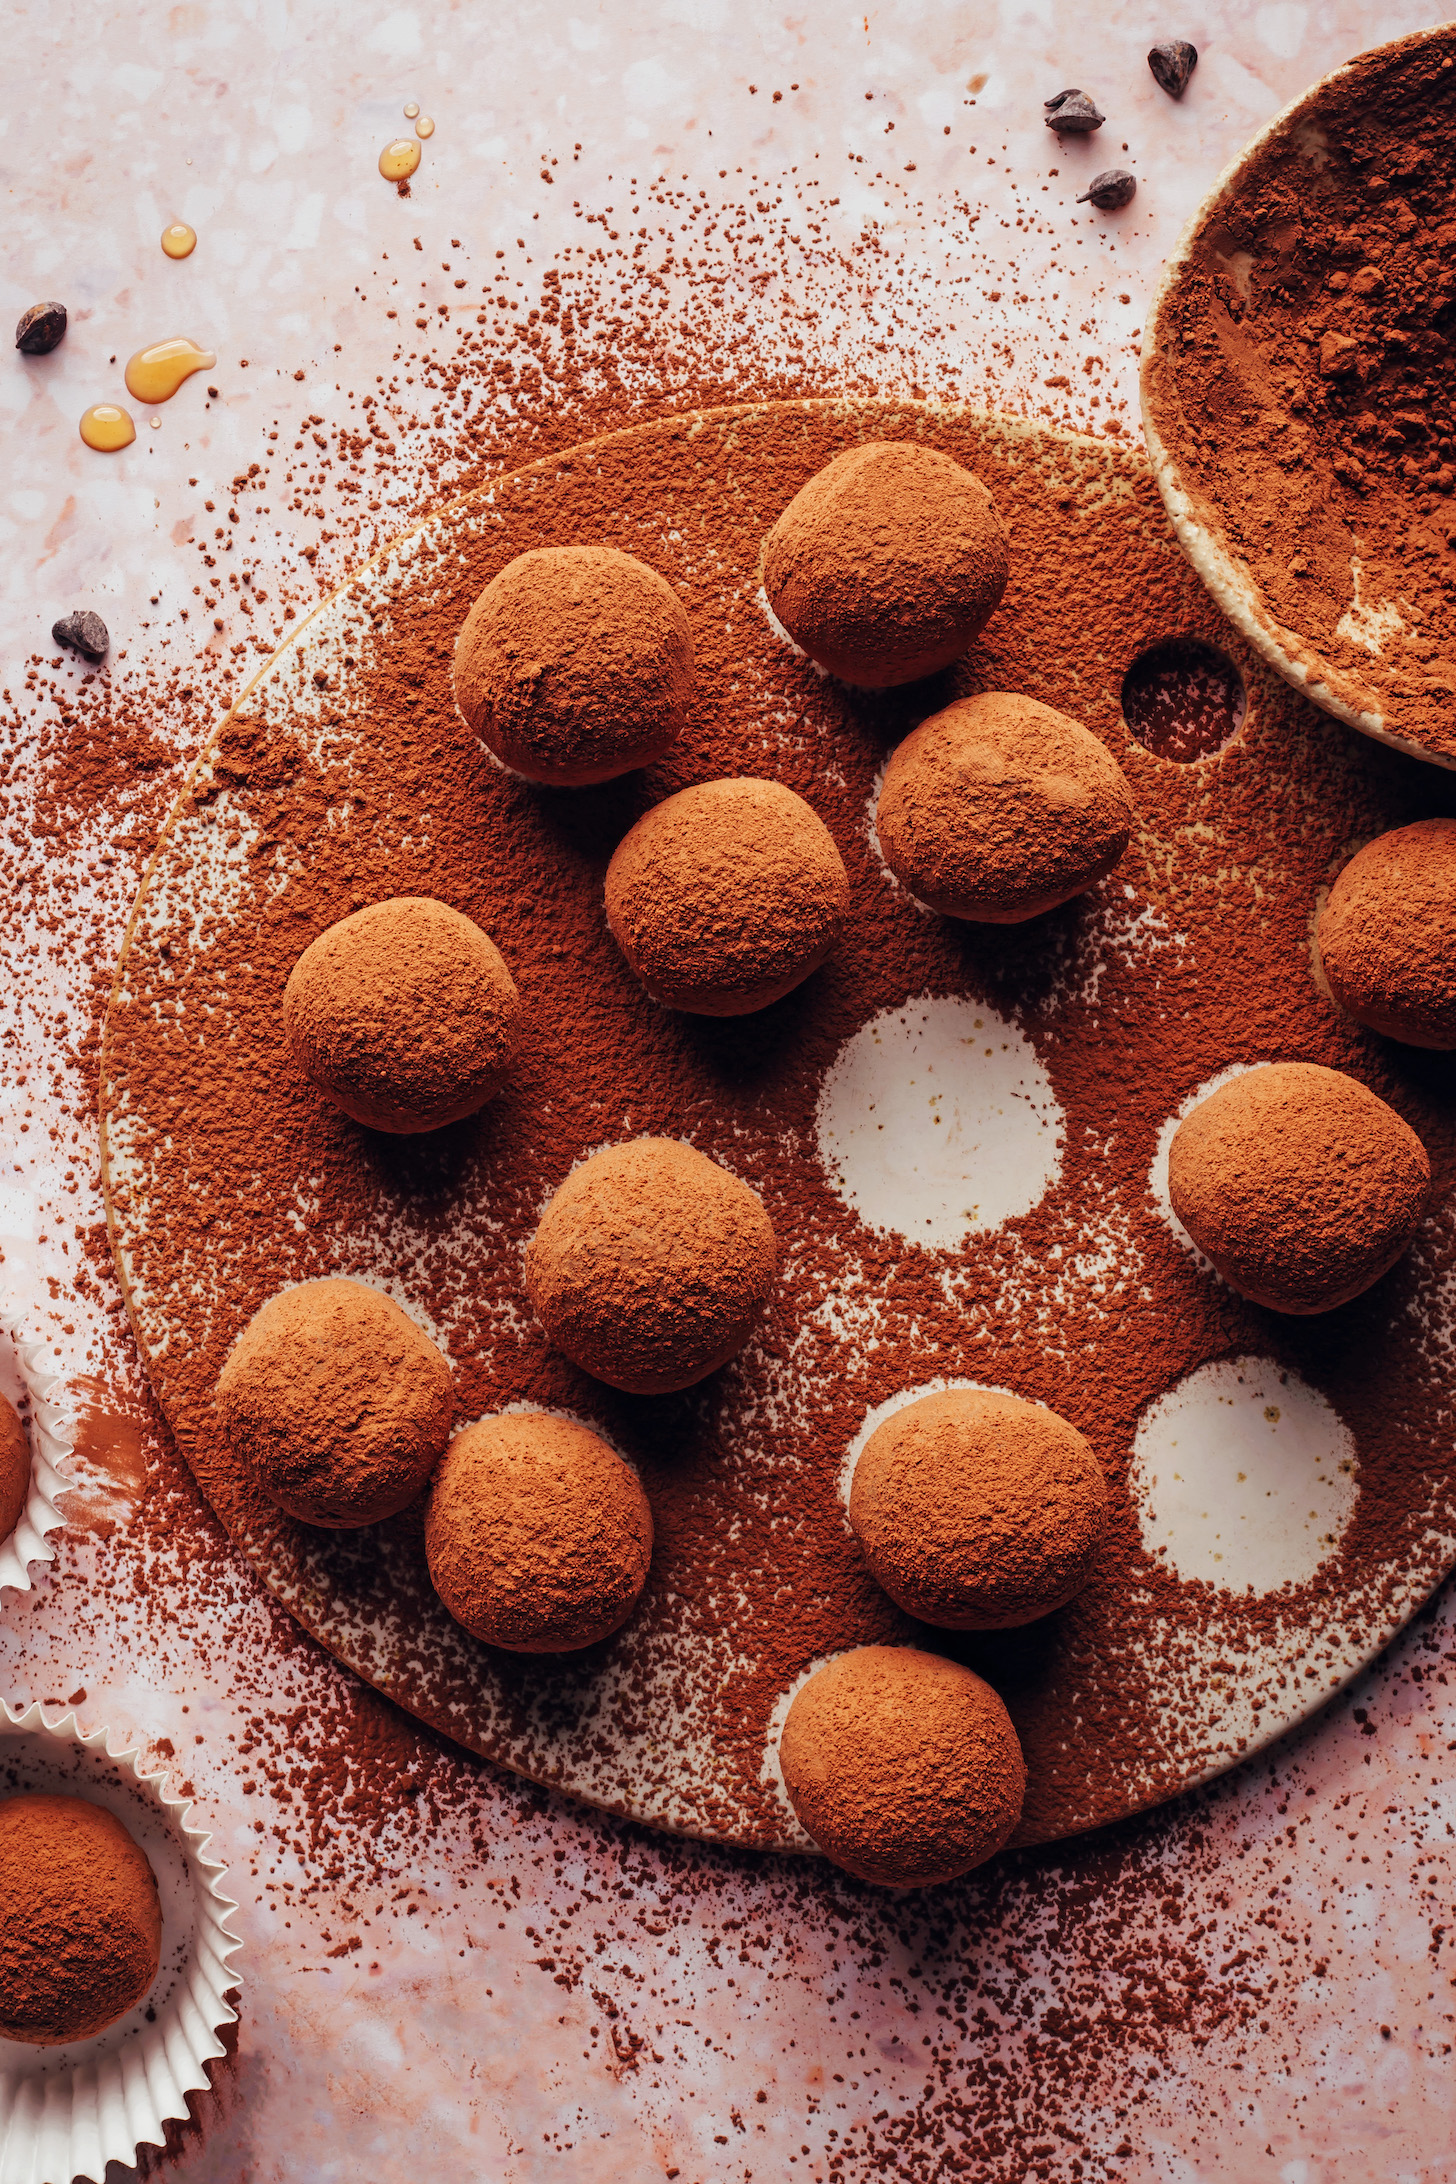 Dark chocolate truffles dusted with cocoa powder